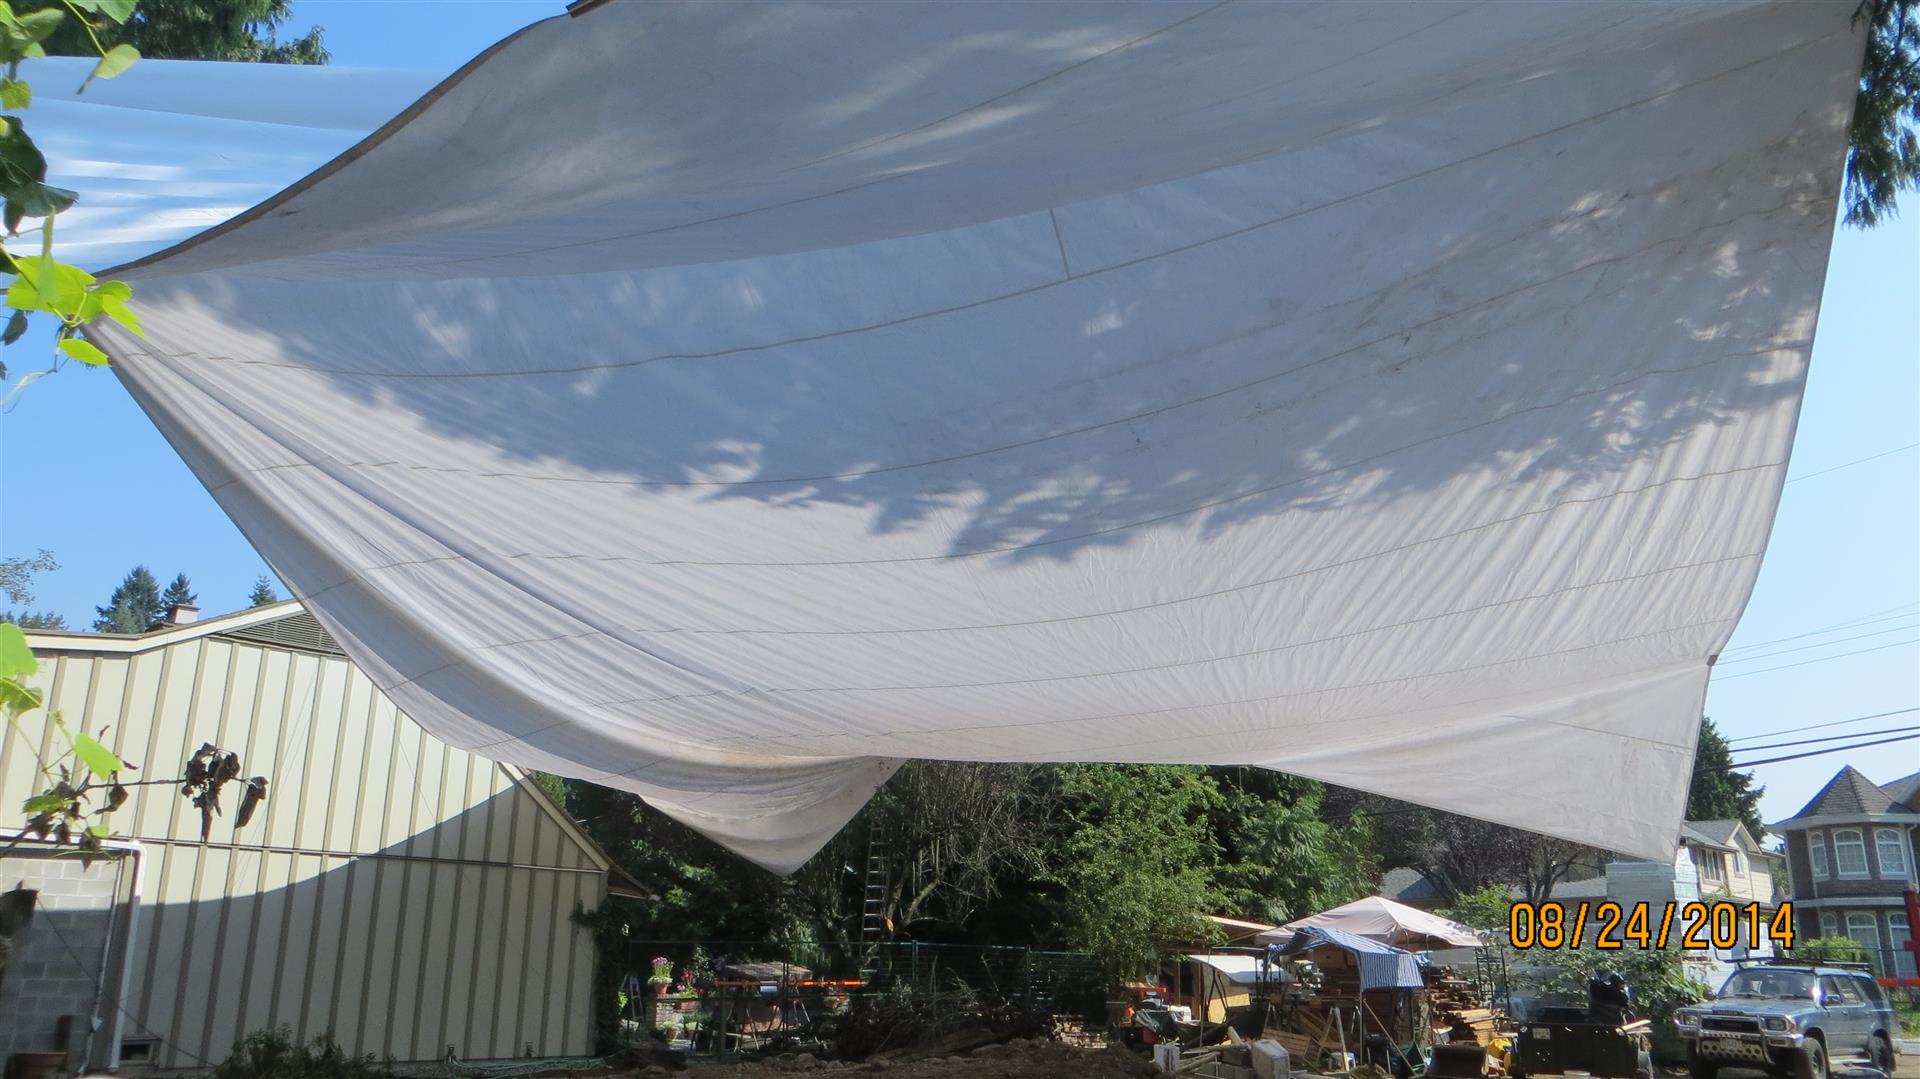 This photo starts to show the scale of this tarp when compared to a 2-Storey house in the background